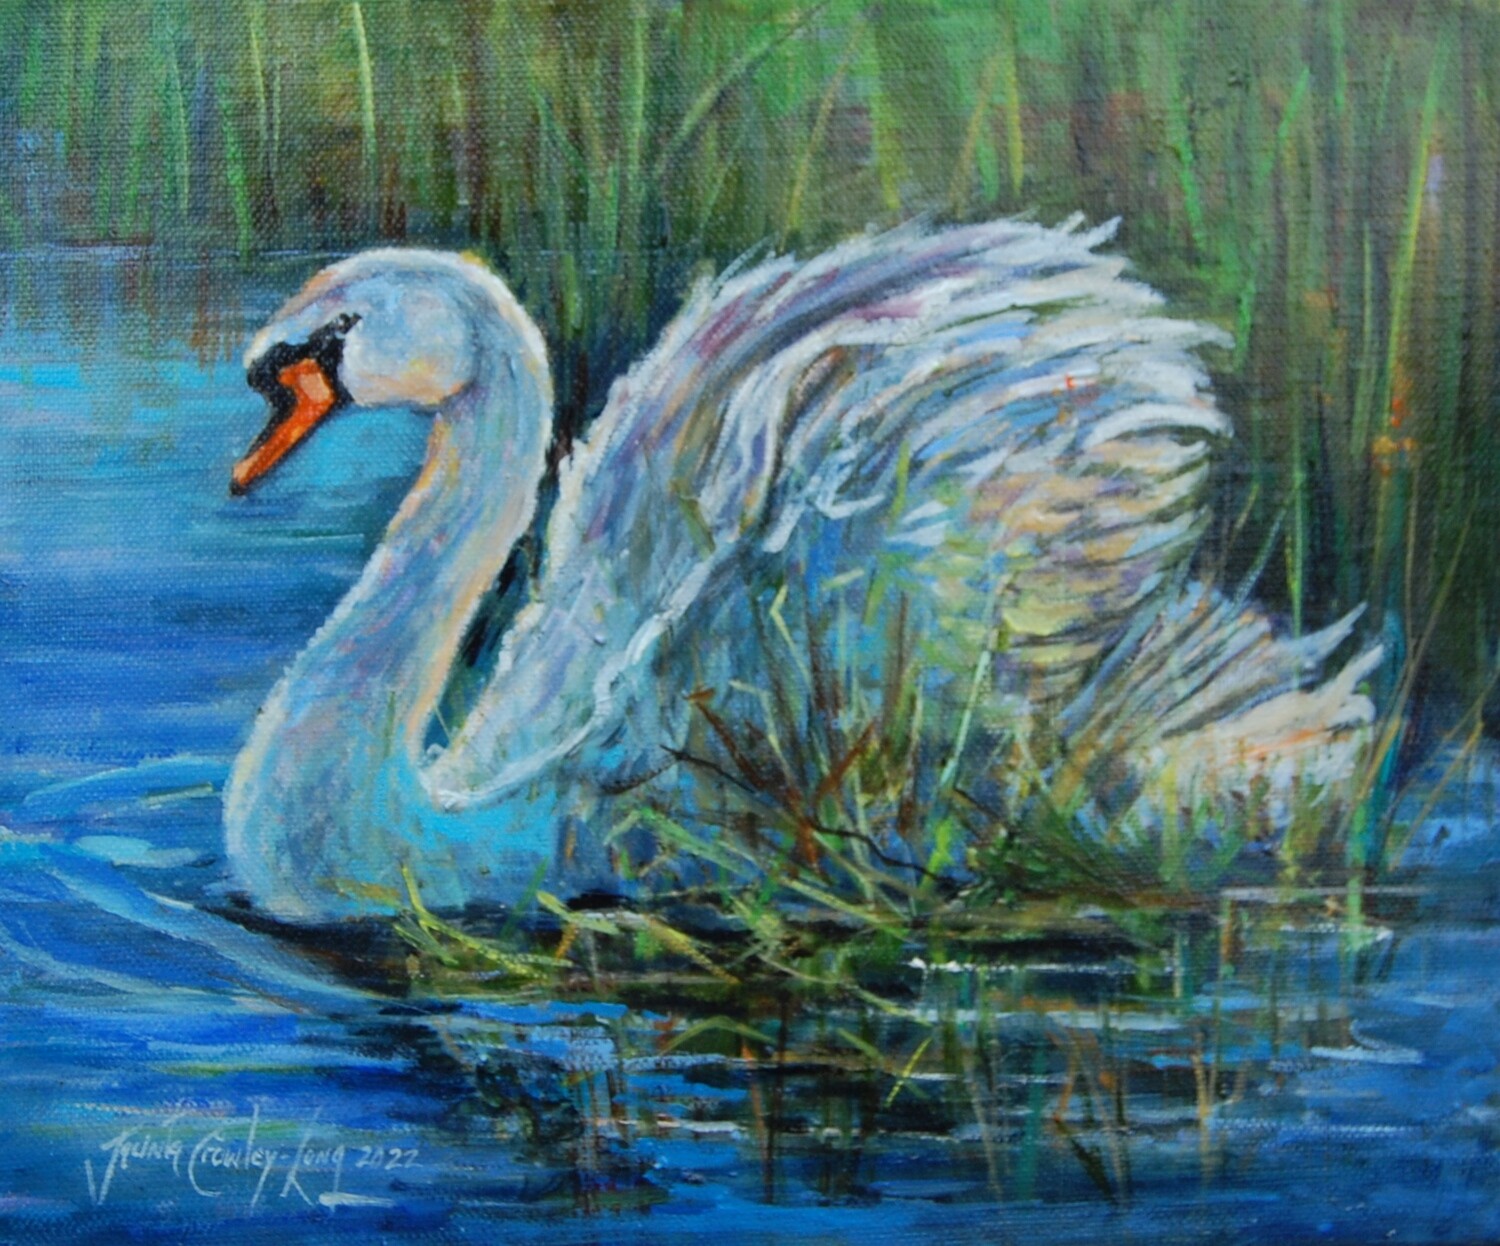 Swanning In (10 x 12")